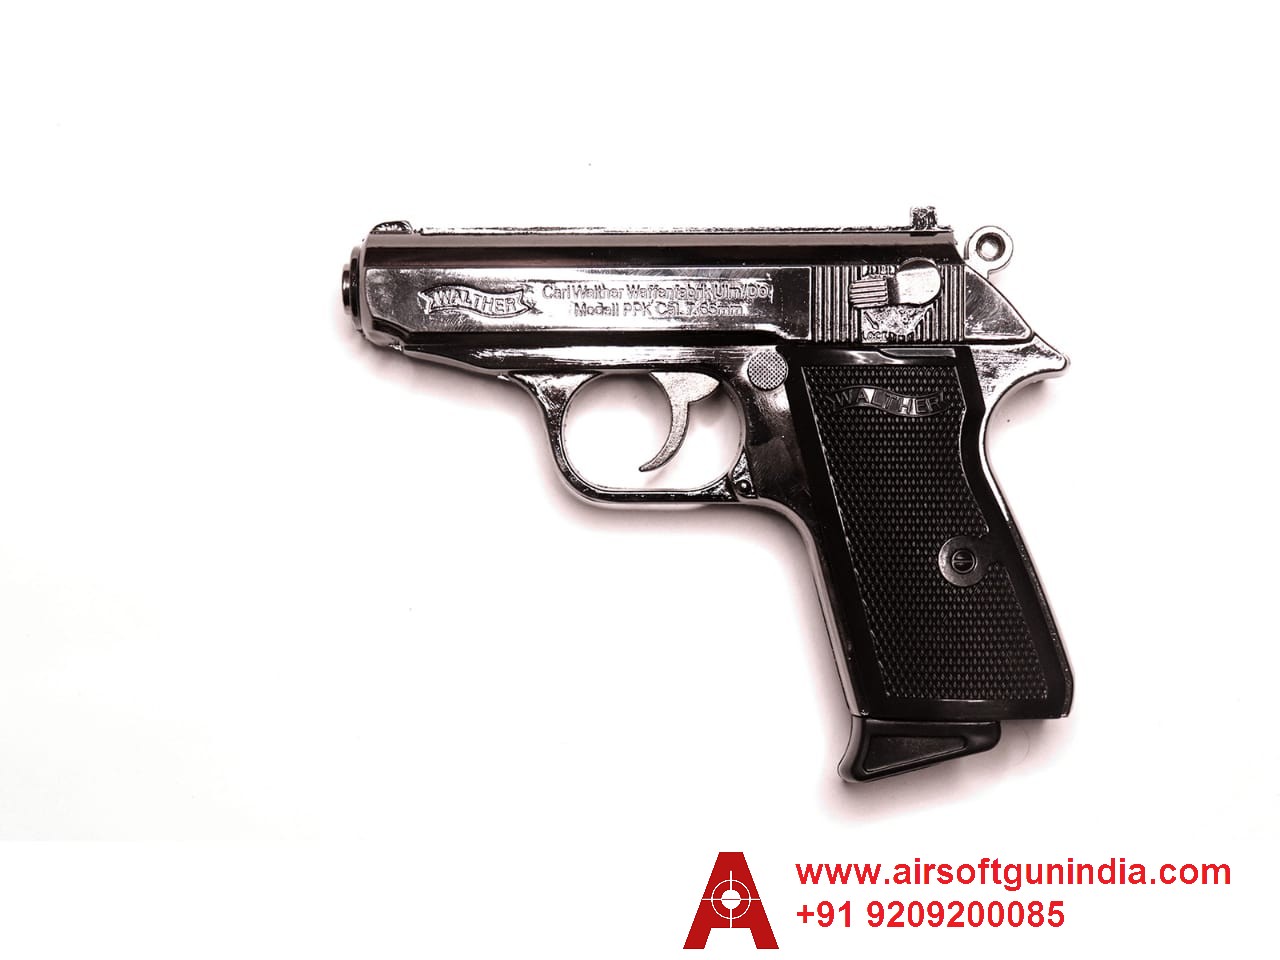 WALTHER PPK SILVER REPLICA LIGHTER BY AIRSOFT GUN INDIA